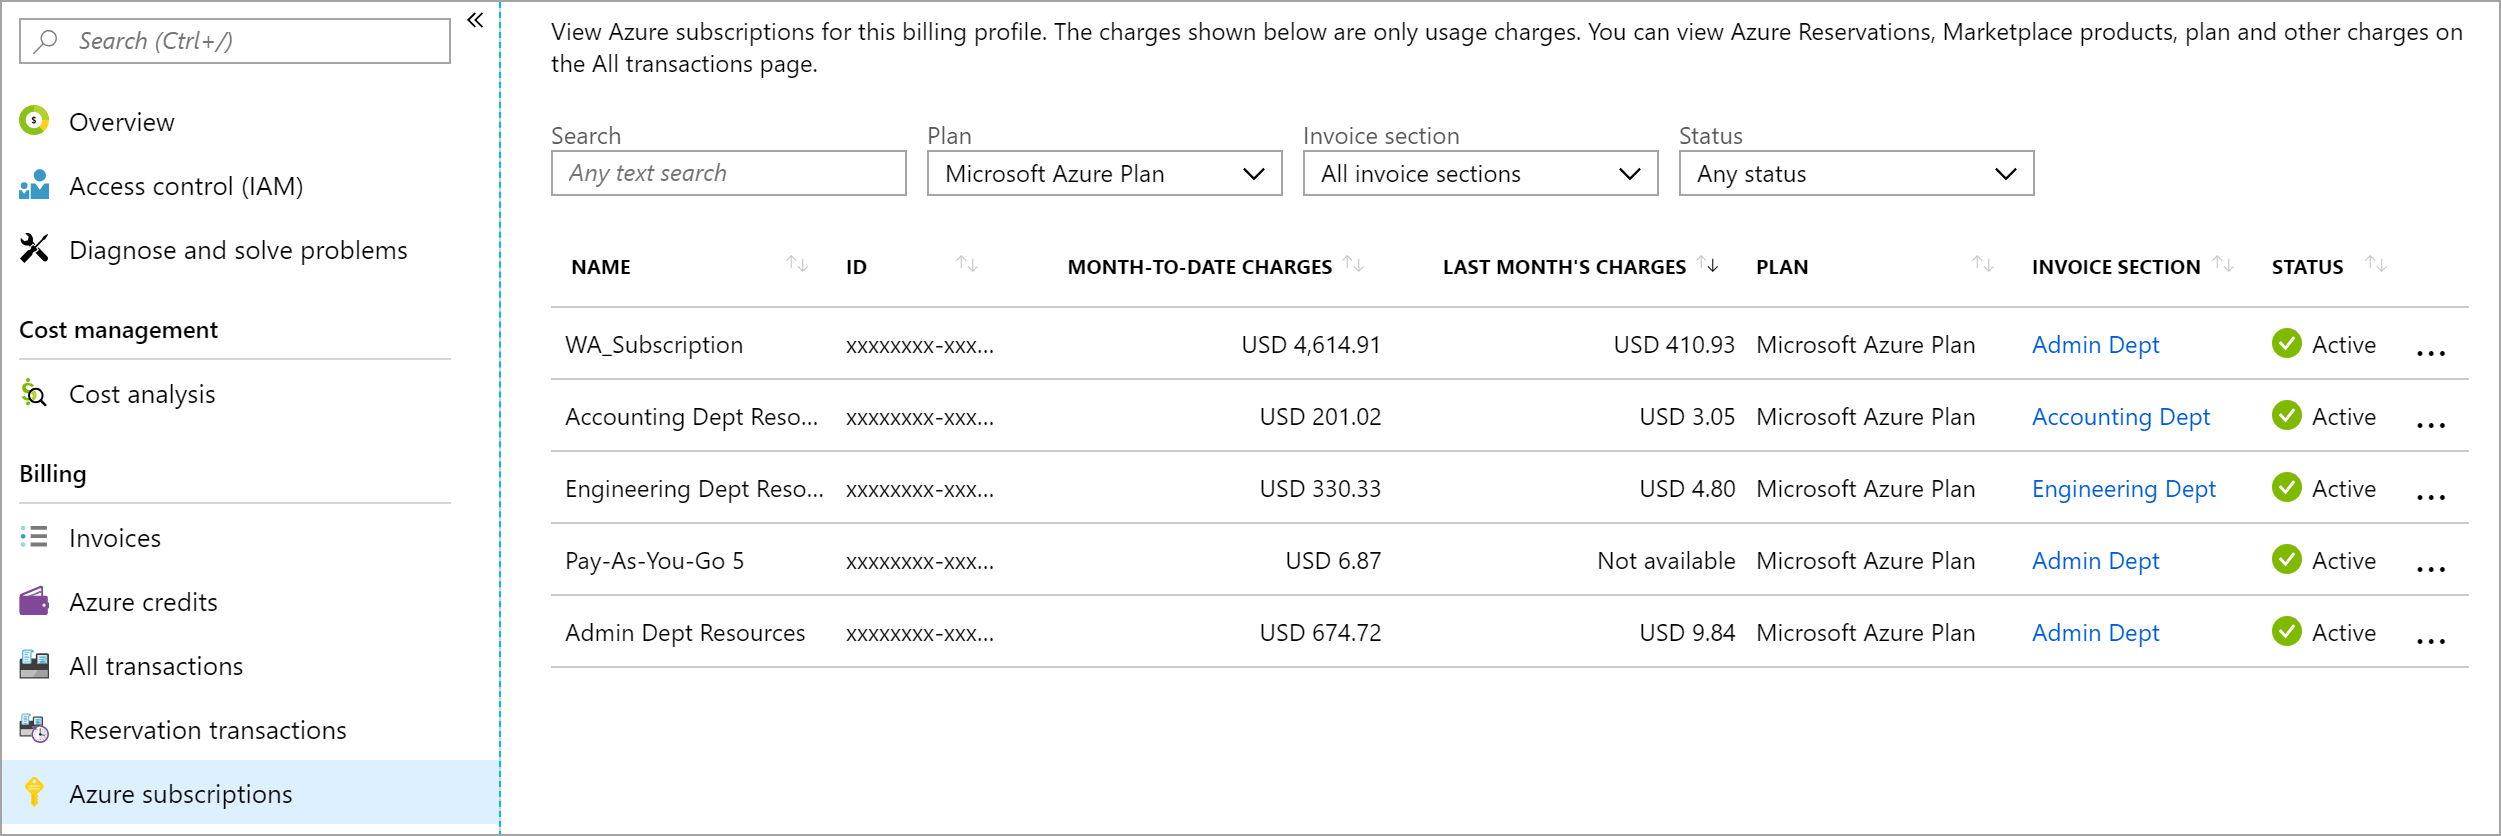 Screenshot shows subscriptions with month-to-date charges and last month's charges.